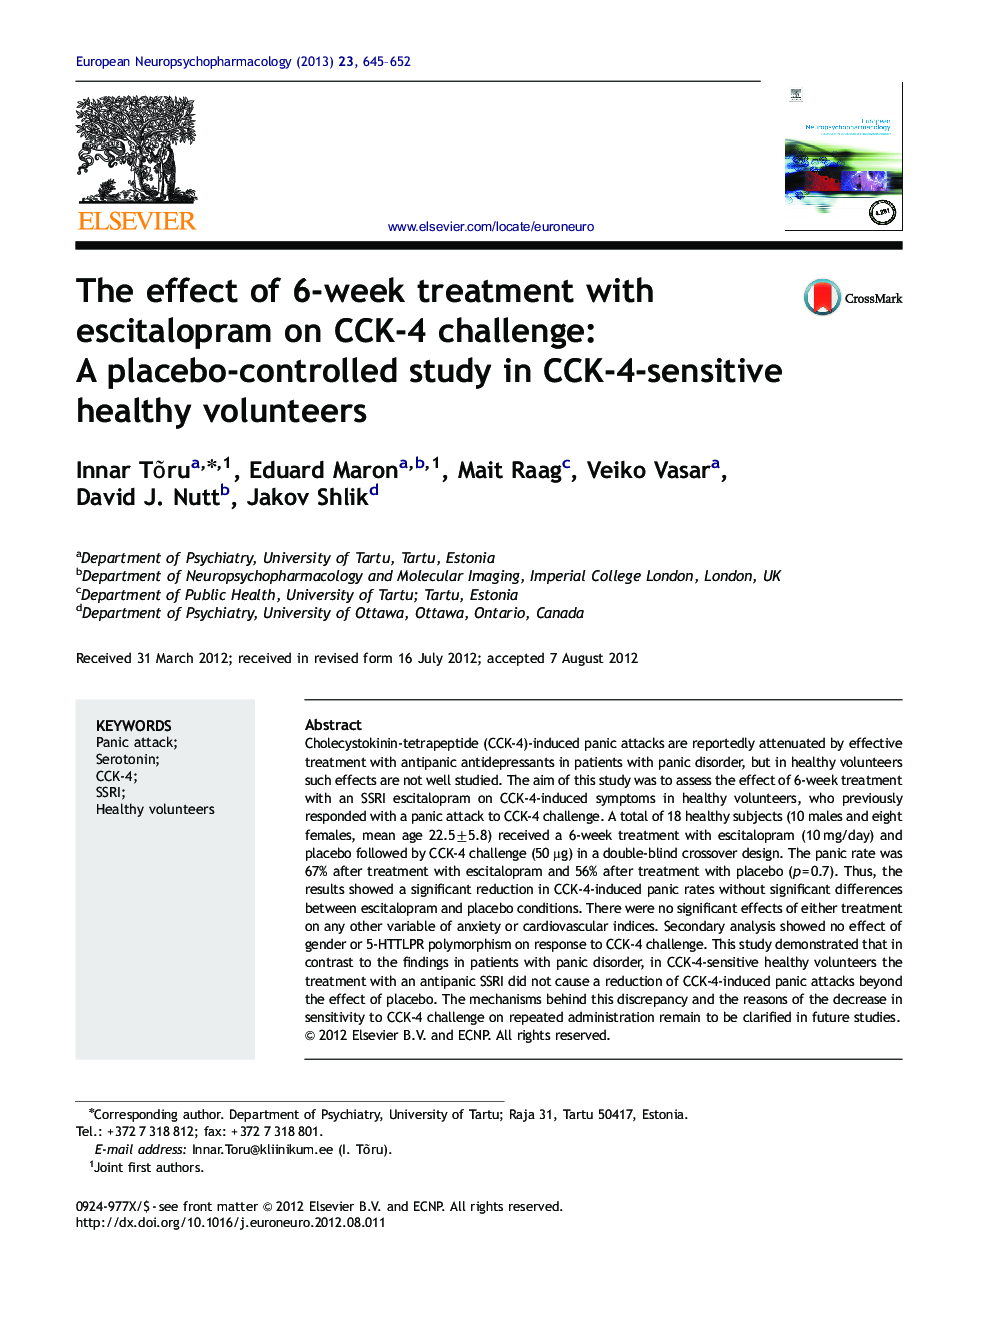 The effect of 6-week treatment with escitalopram on CCK-4 challenge: A placebo-controlled study in CCK-4-sensitive healthy volunteers